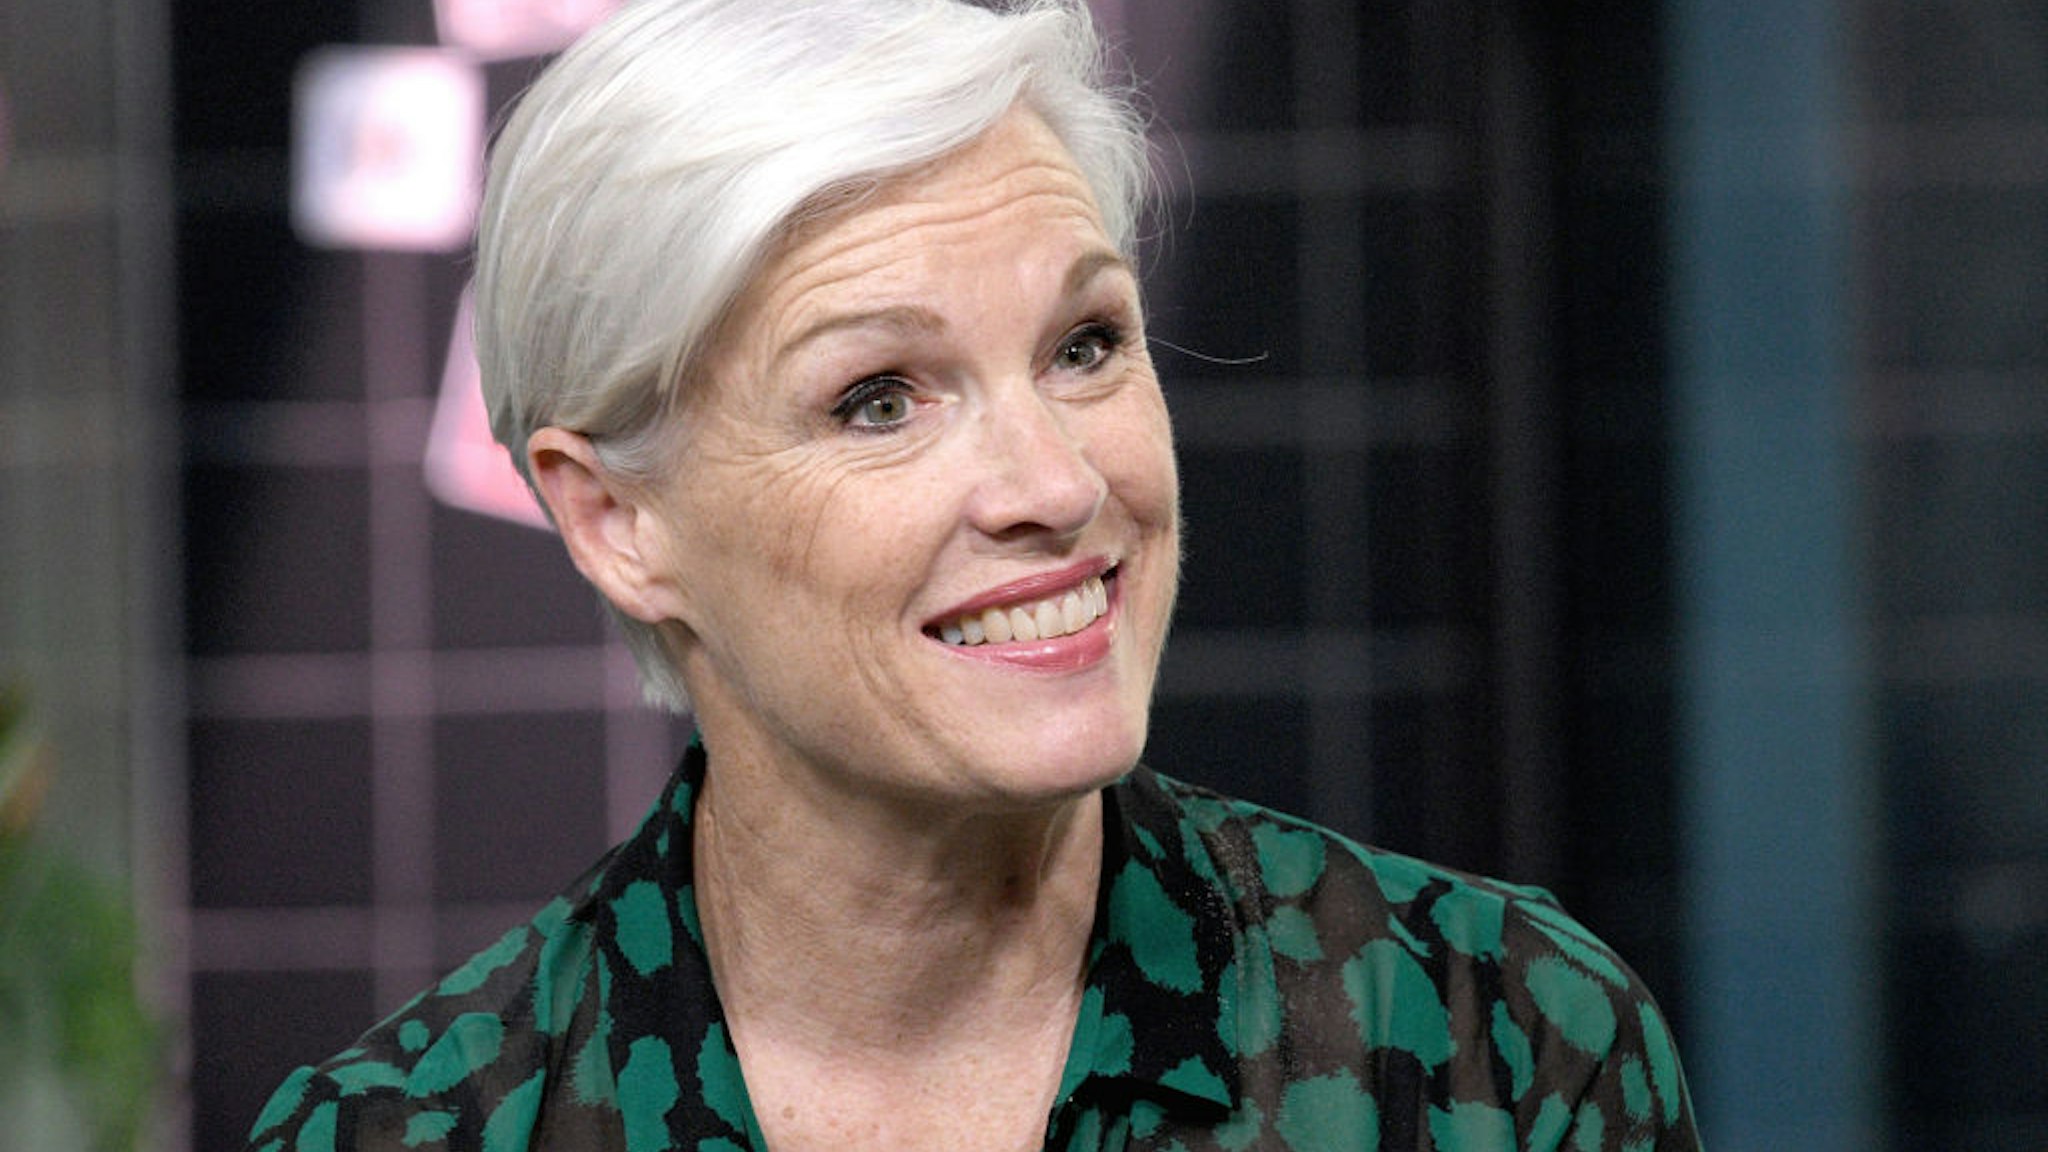 Former President of Planned Parenthood, author Cecile Richards discusses the book “ Make Trouble: Standing Up, Speaking Out, and Finding the Courage to Lead – My Life Story” Young Readers Edition at Build Studio on October 15, 2019 in New York City.